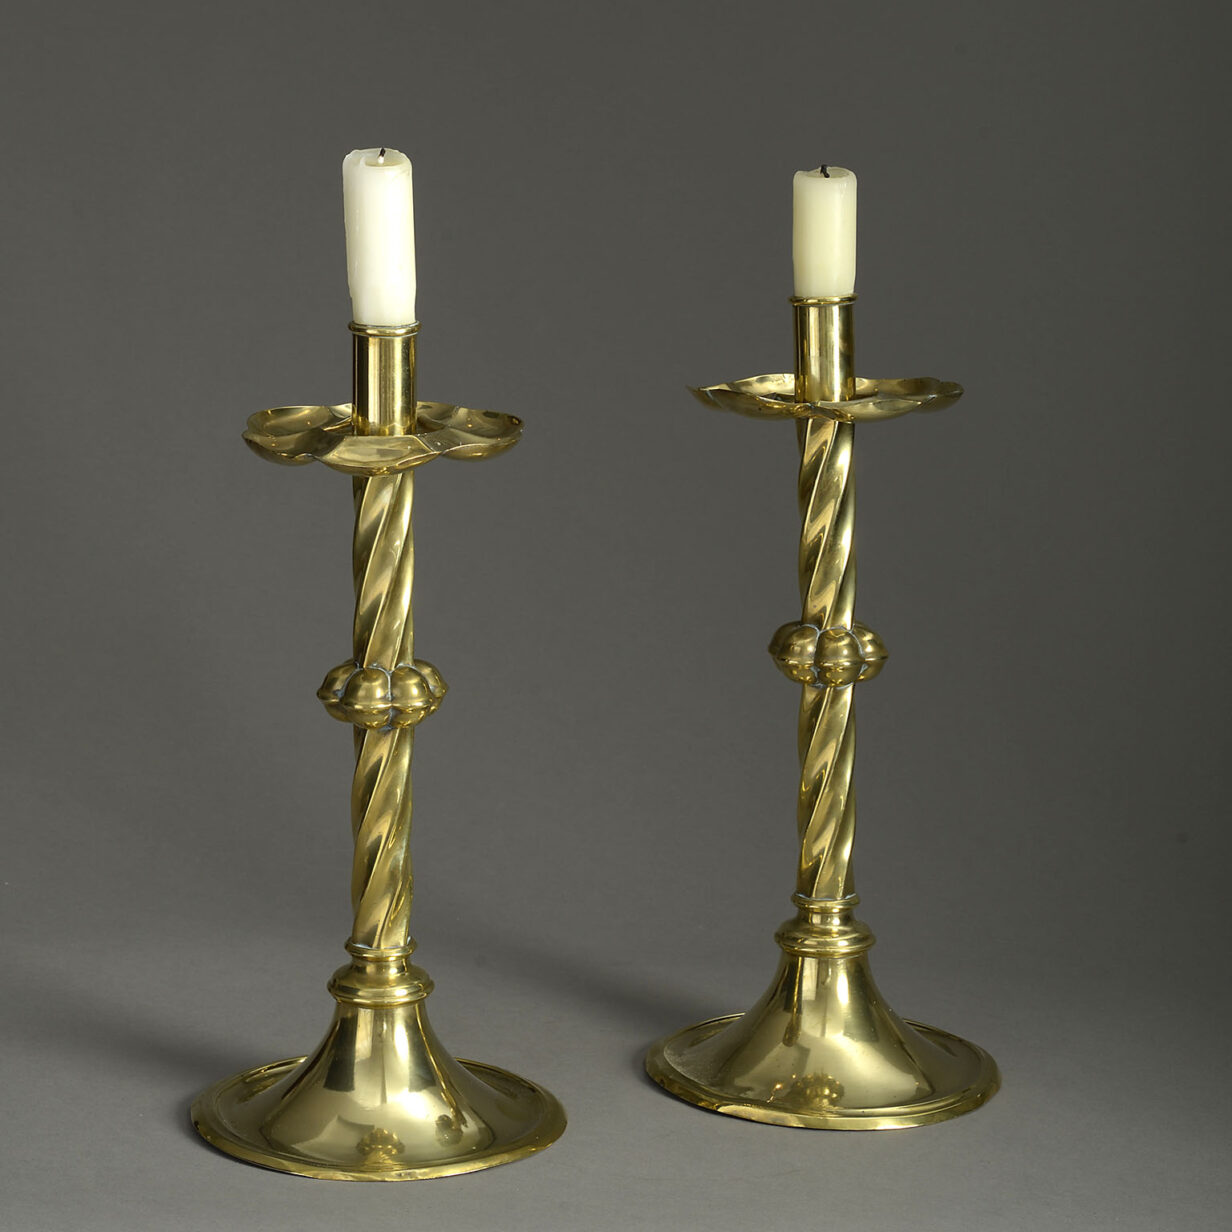 Large pair of mid-19th century victorian brass candlesticks